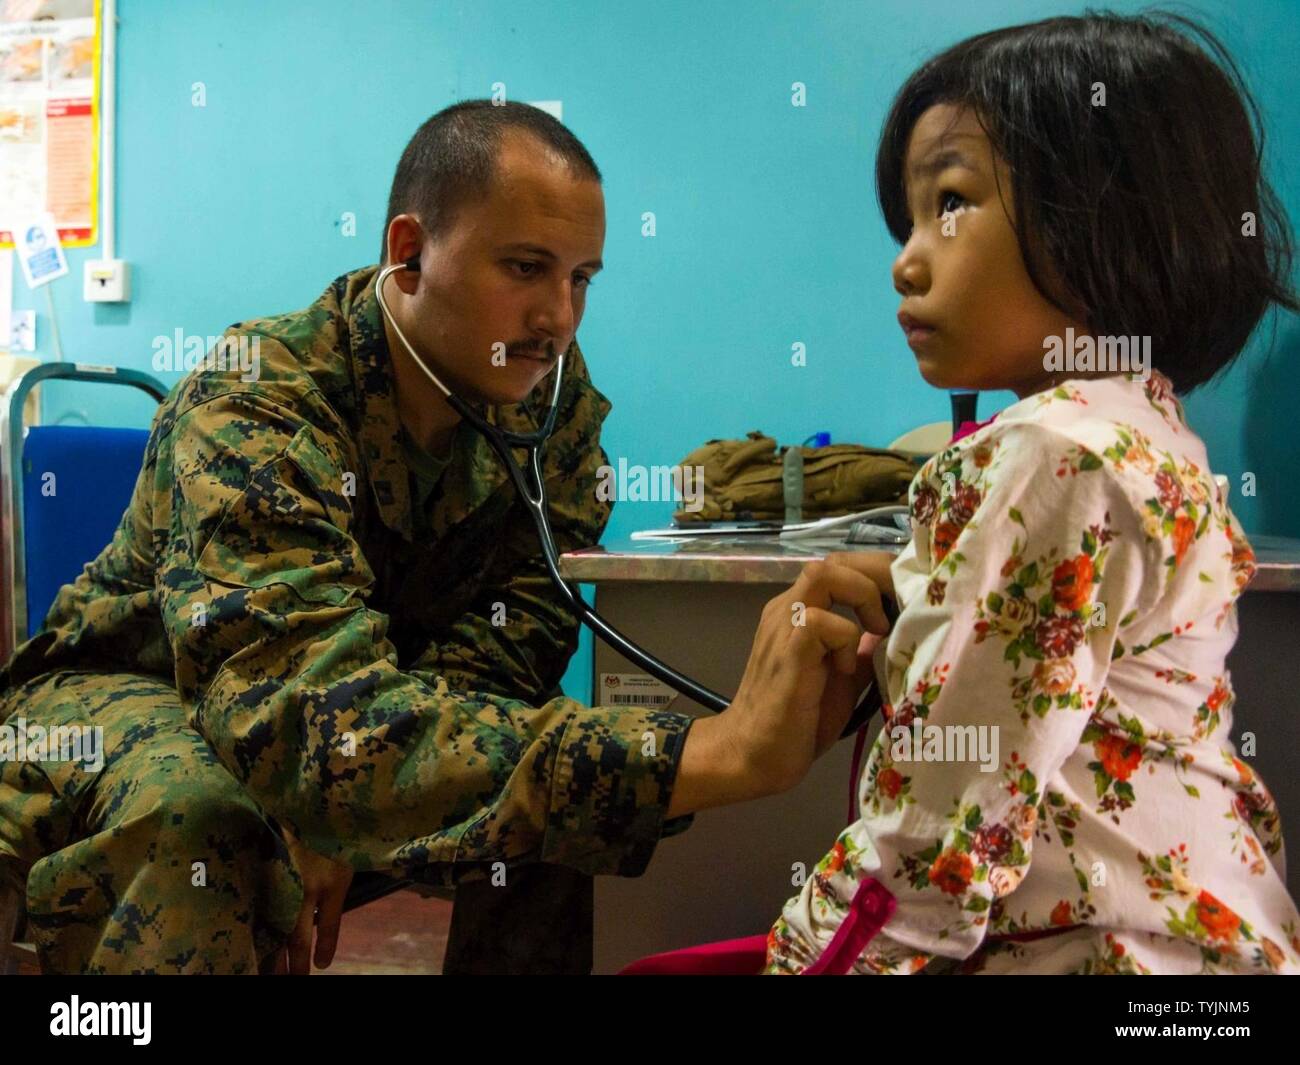 SABAH PROVINCE, Malaysia (November 11, 2016) – Lt. Russell Paloian, a medical officer, examines the heartbeat a of a child during a medical civil affairs project during Exercise Tiger Strike 2016 in Sabah Province, Malaysia, Nov. 11. U.S. Navy and Malaysian medical personnel worked together in a medical capabilities exchange which gave the Navy medical team the opportunity to work together with local medical professionals to give care and treatment to local Malaysians. Paloian is with Combat Logistics Battalion 11. Stock Photo